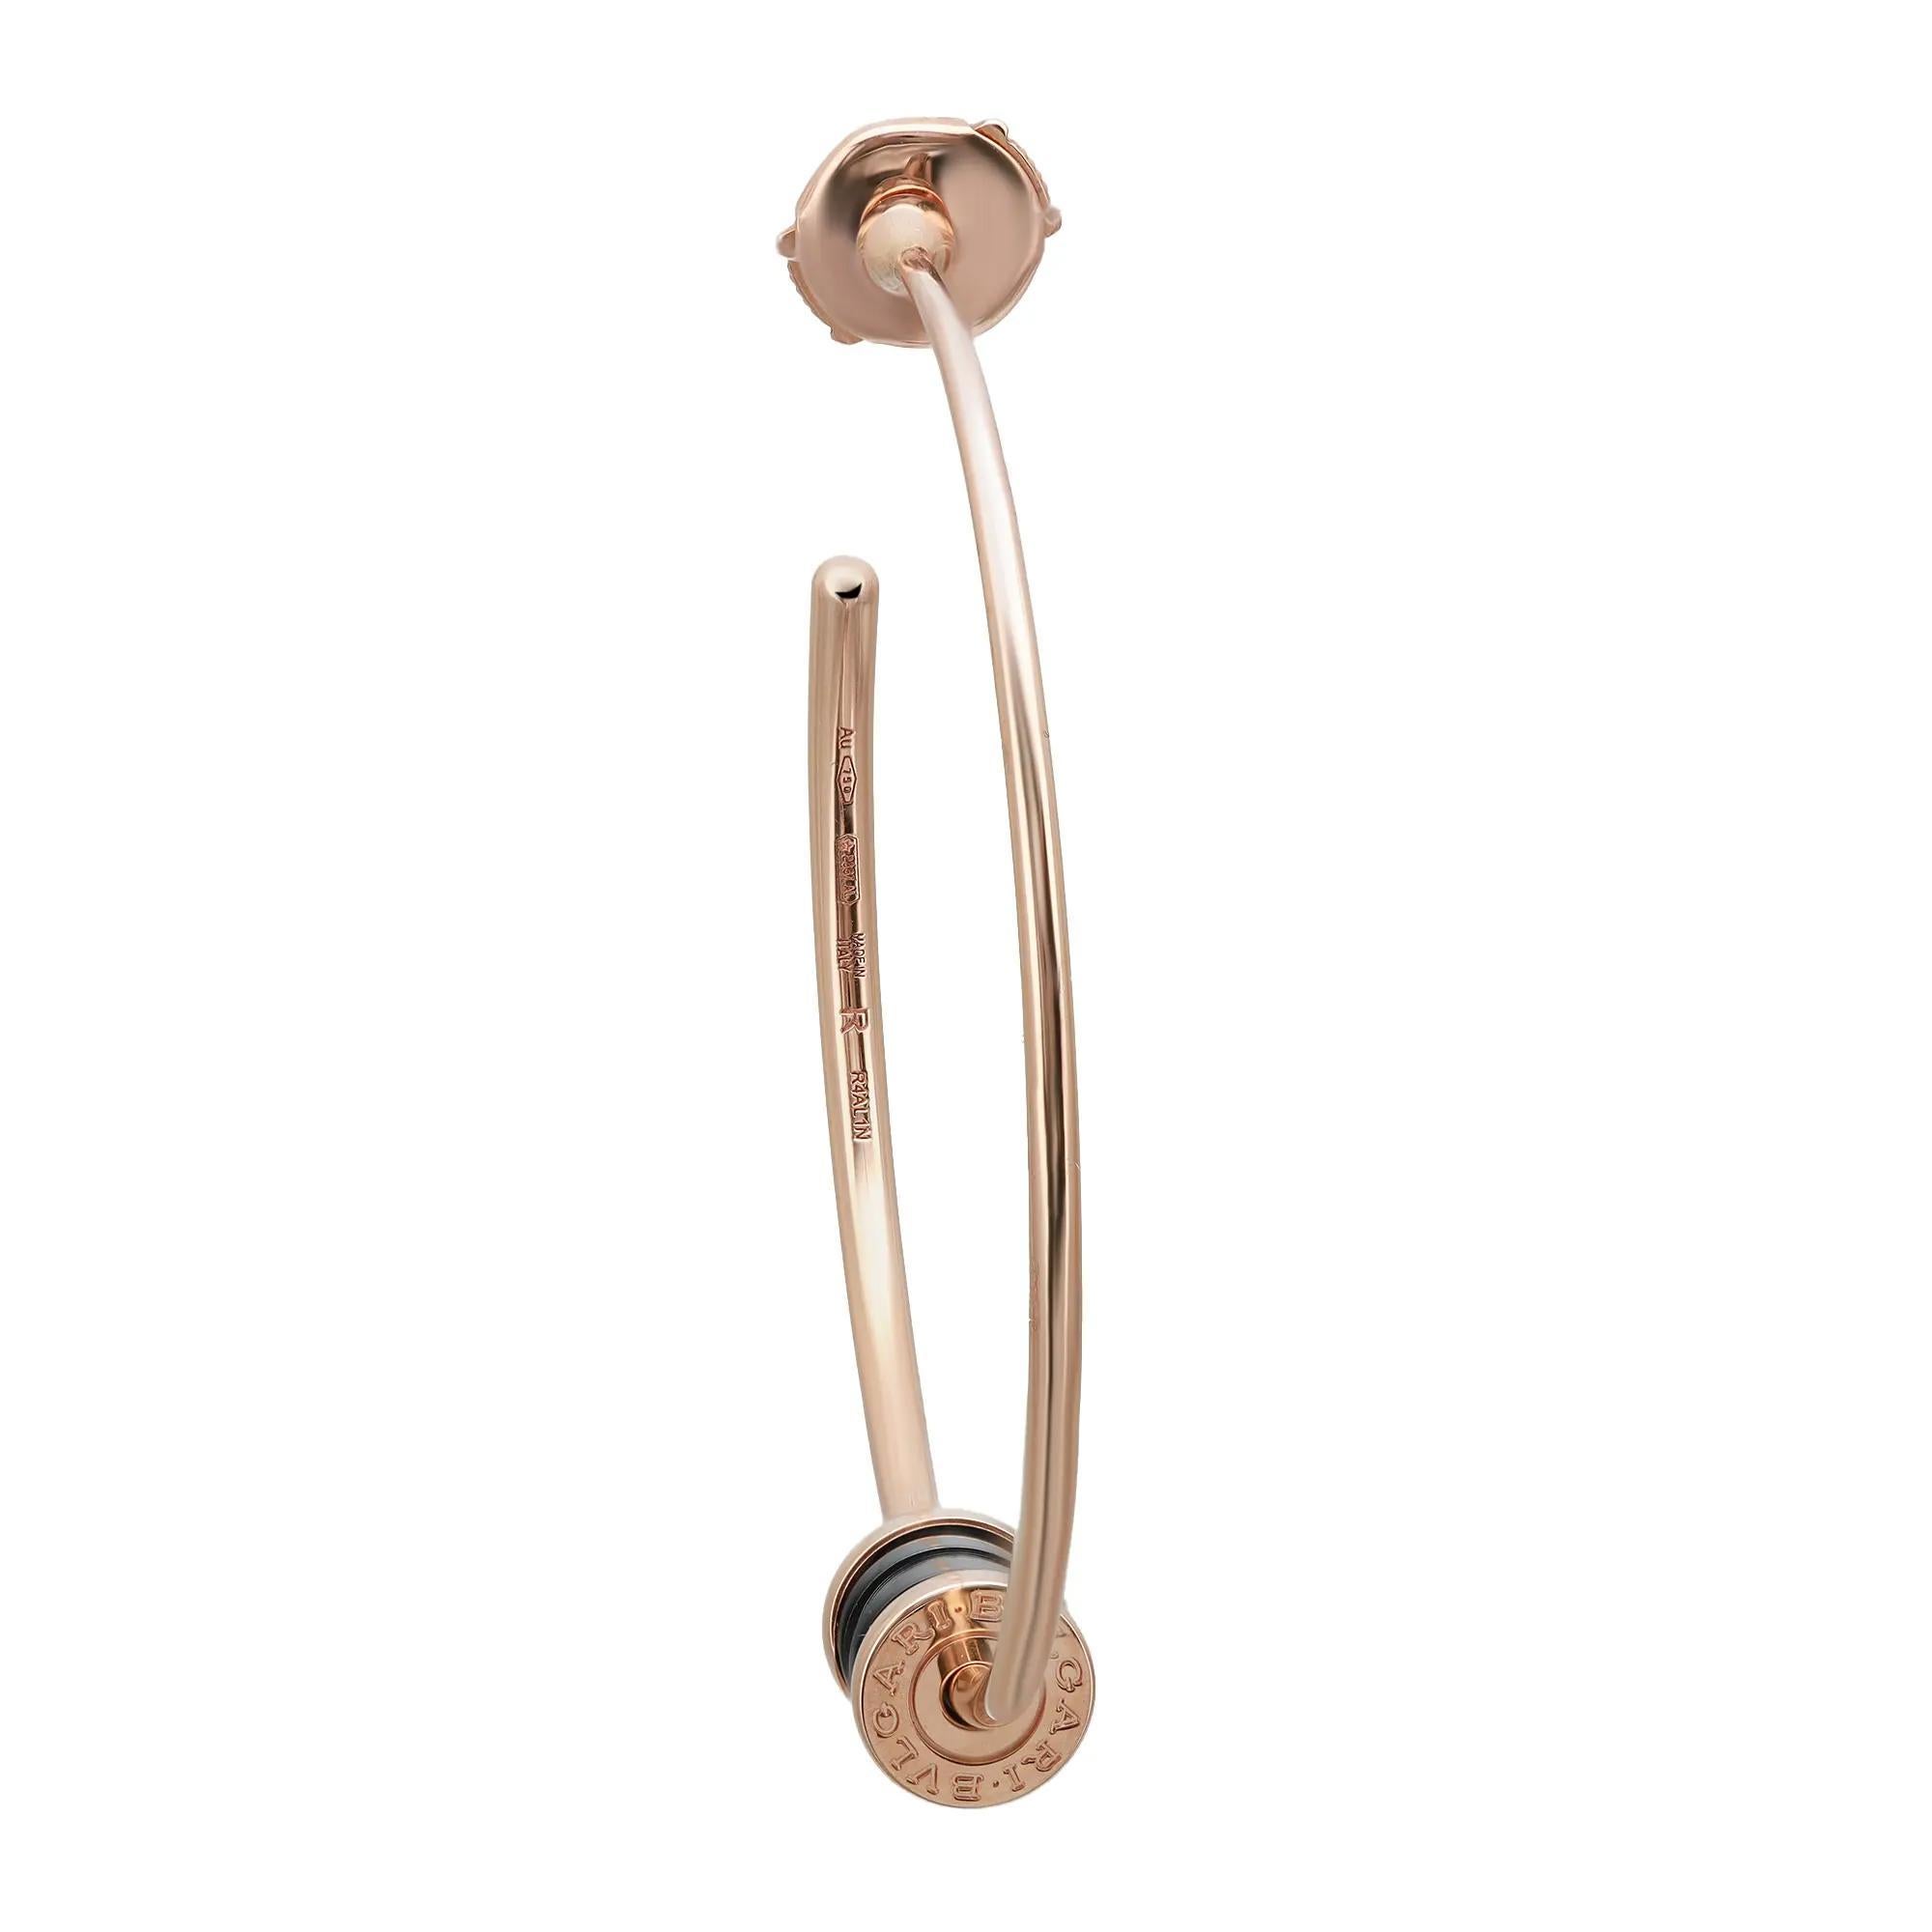 Bvlgari B.Zero1 Ceramic Hoop Earrings 18K Rose Gold In New Condition For Sale In New York, NY